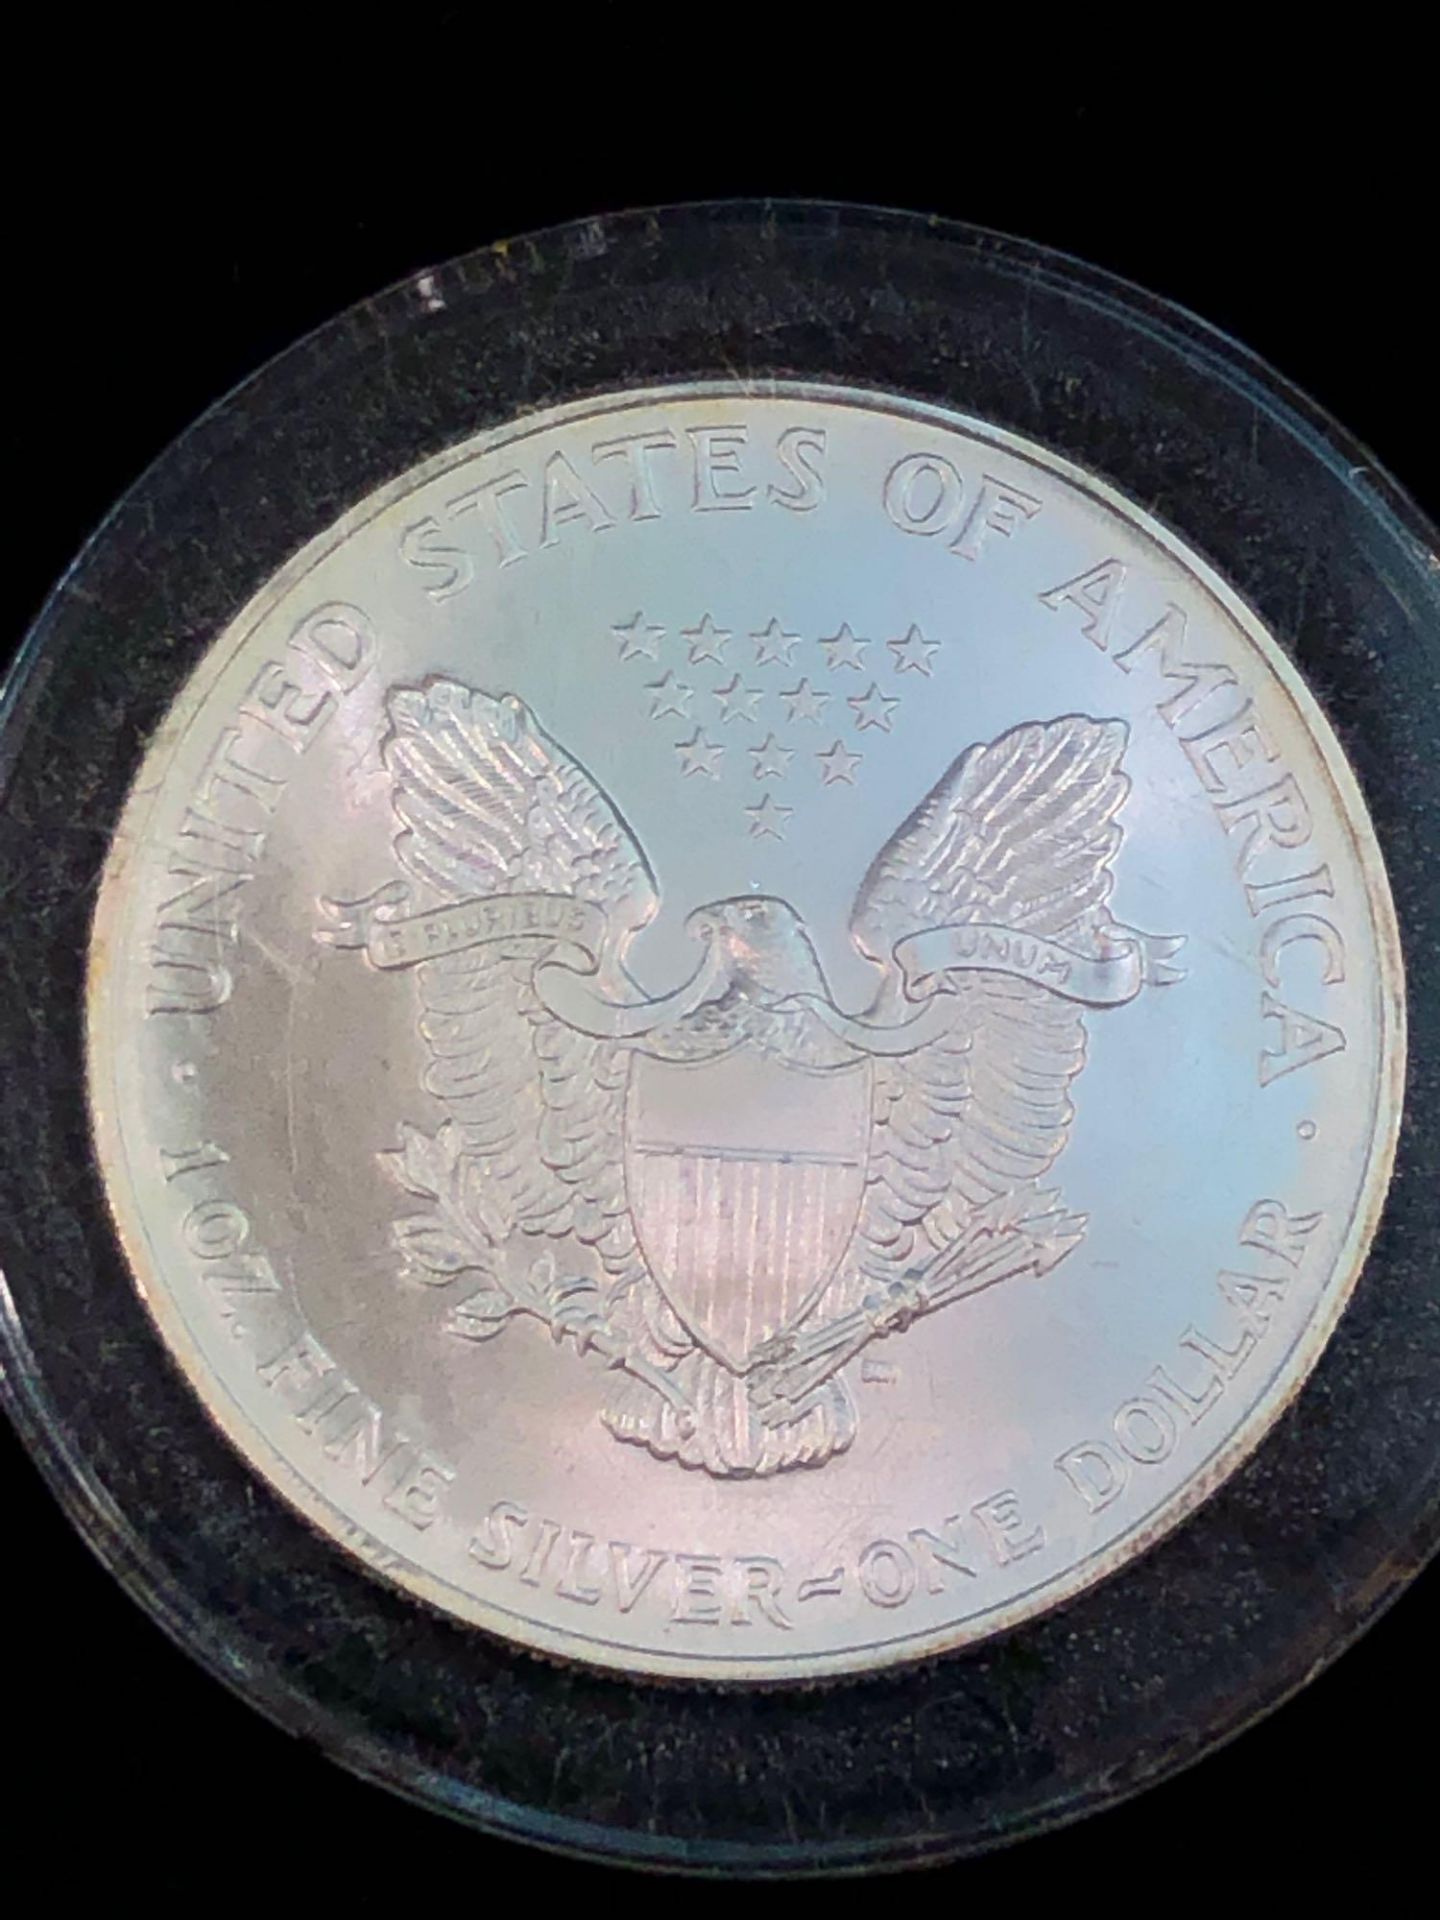 2003 SILVER AMERICAN EAGLE COIN 1 OZT - Image 3 of 4